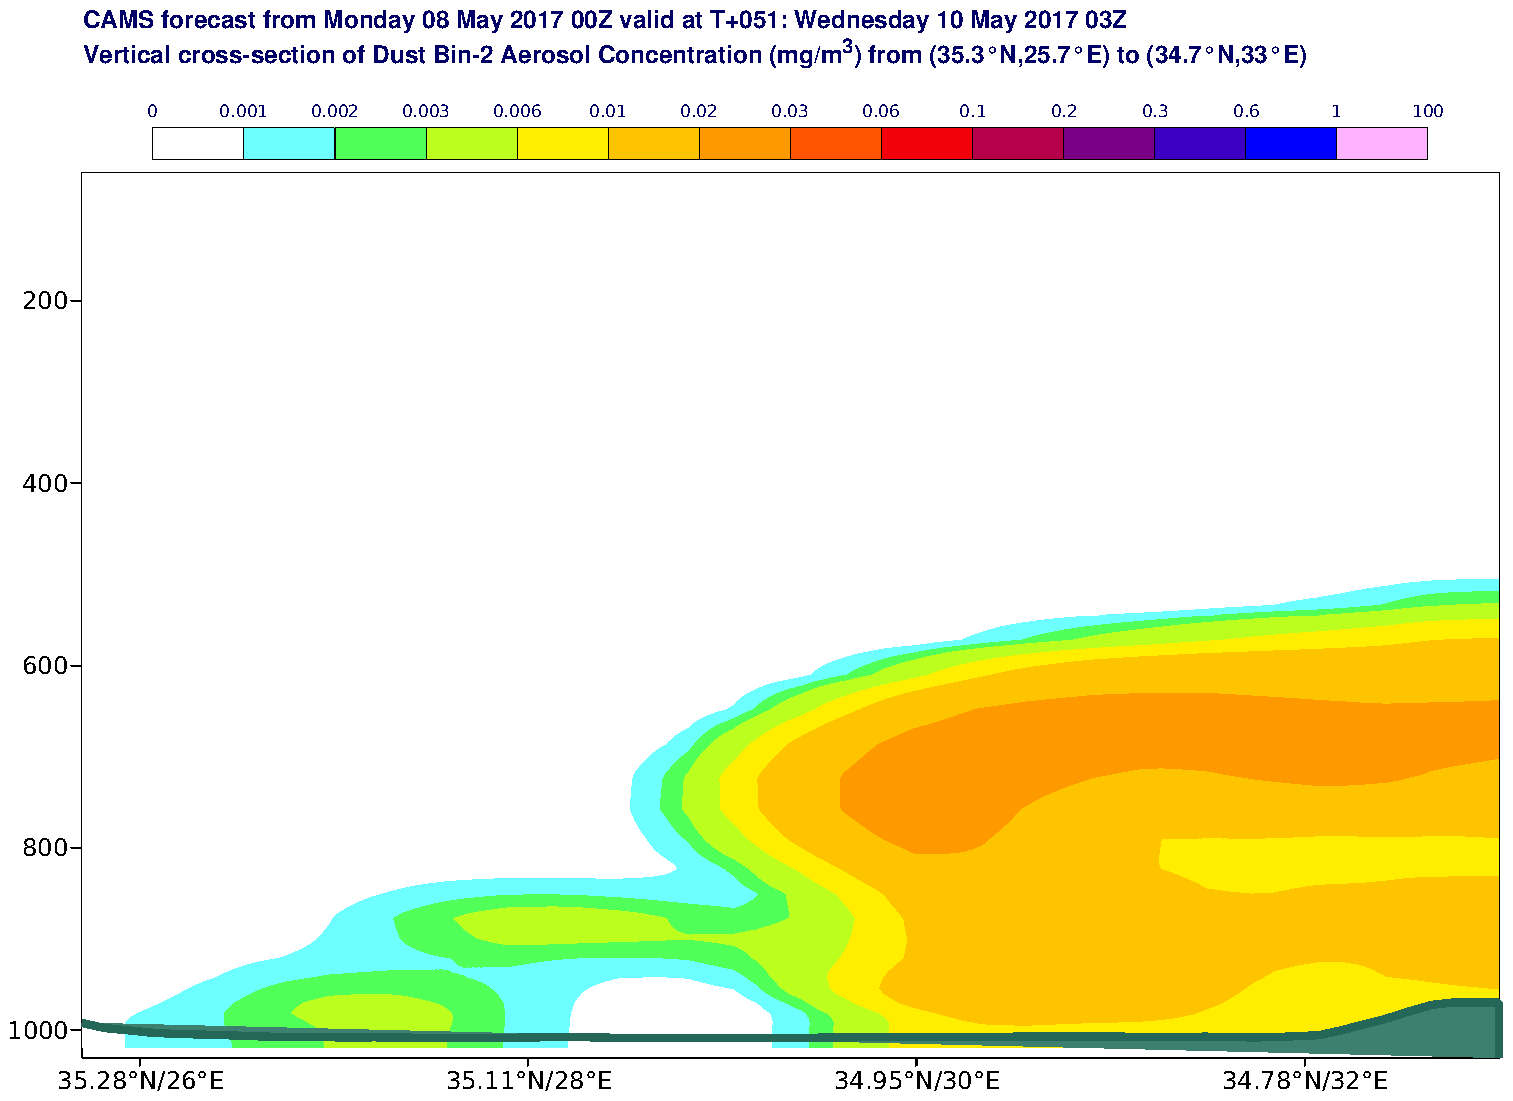 Vertical cross-section of Dust Bin-2 Aerosol Concentration (mg/m3) valid at T51 - 2017-05-10 03:00